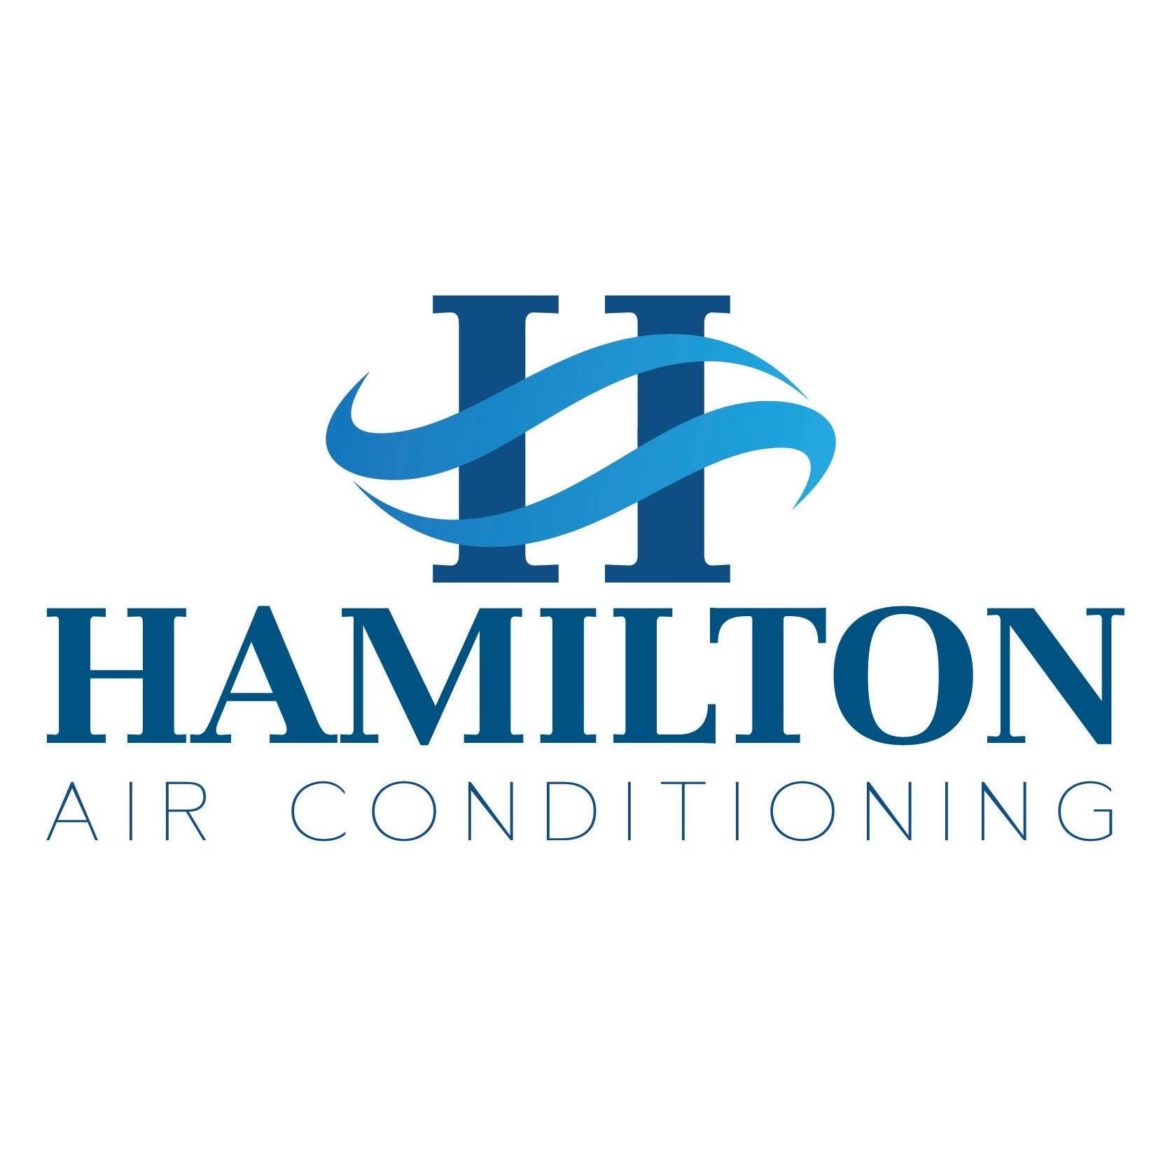 Hamilton Air Conditioning Ltd Launches Comprehensive Air Conditioning Maintenance Services in London, Ensuring Optimal Performance and Longevity